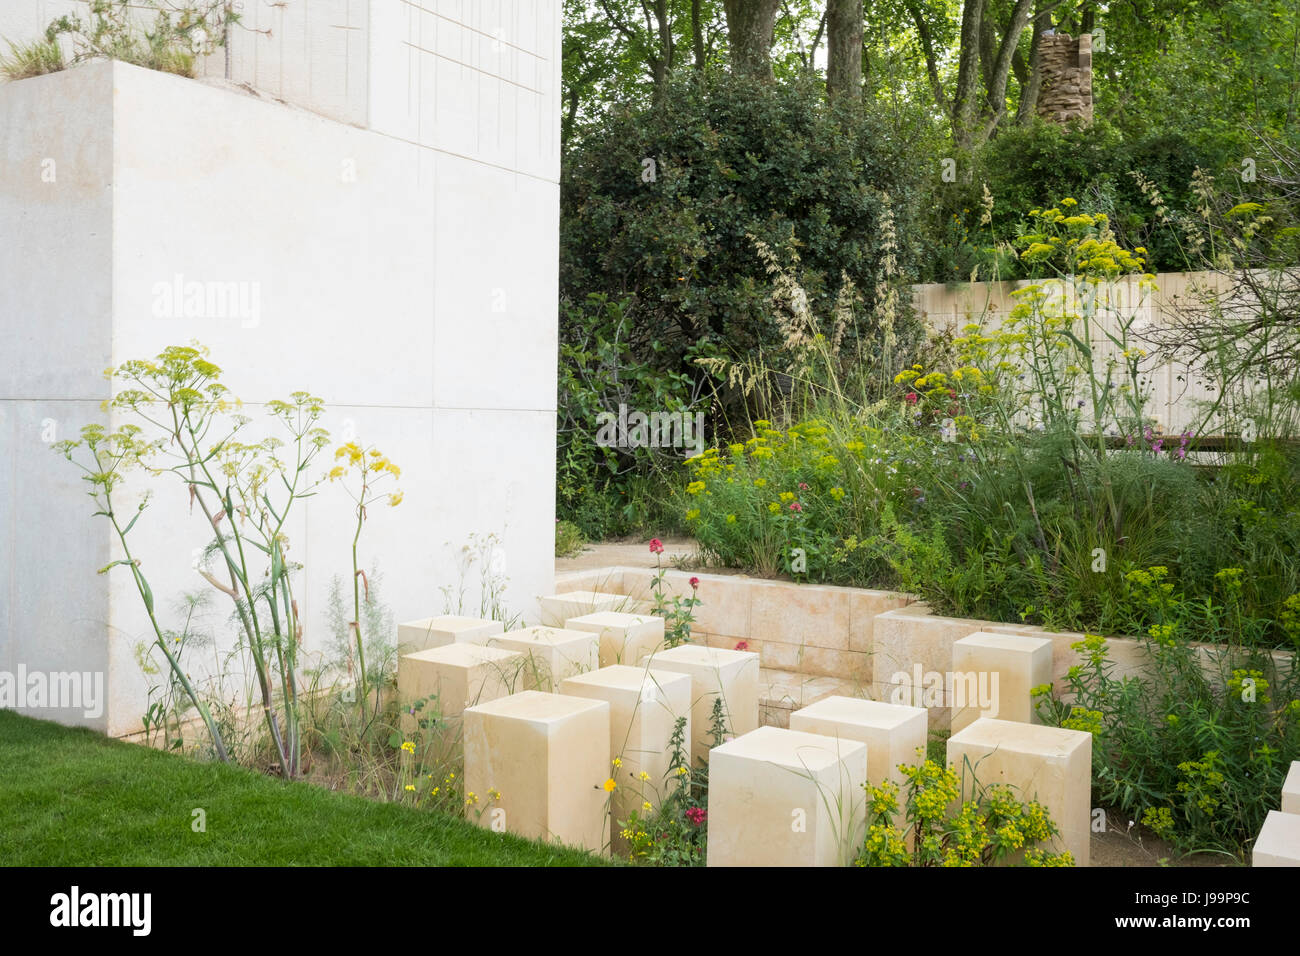 The M&G Garden designed by James Basson and winner of the best show garden award at the RHS 2017 Chelsea Flower Show.  The unusual design represents a Stock Photo